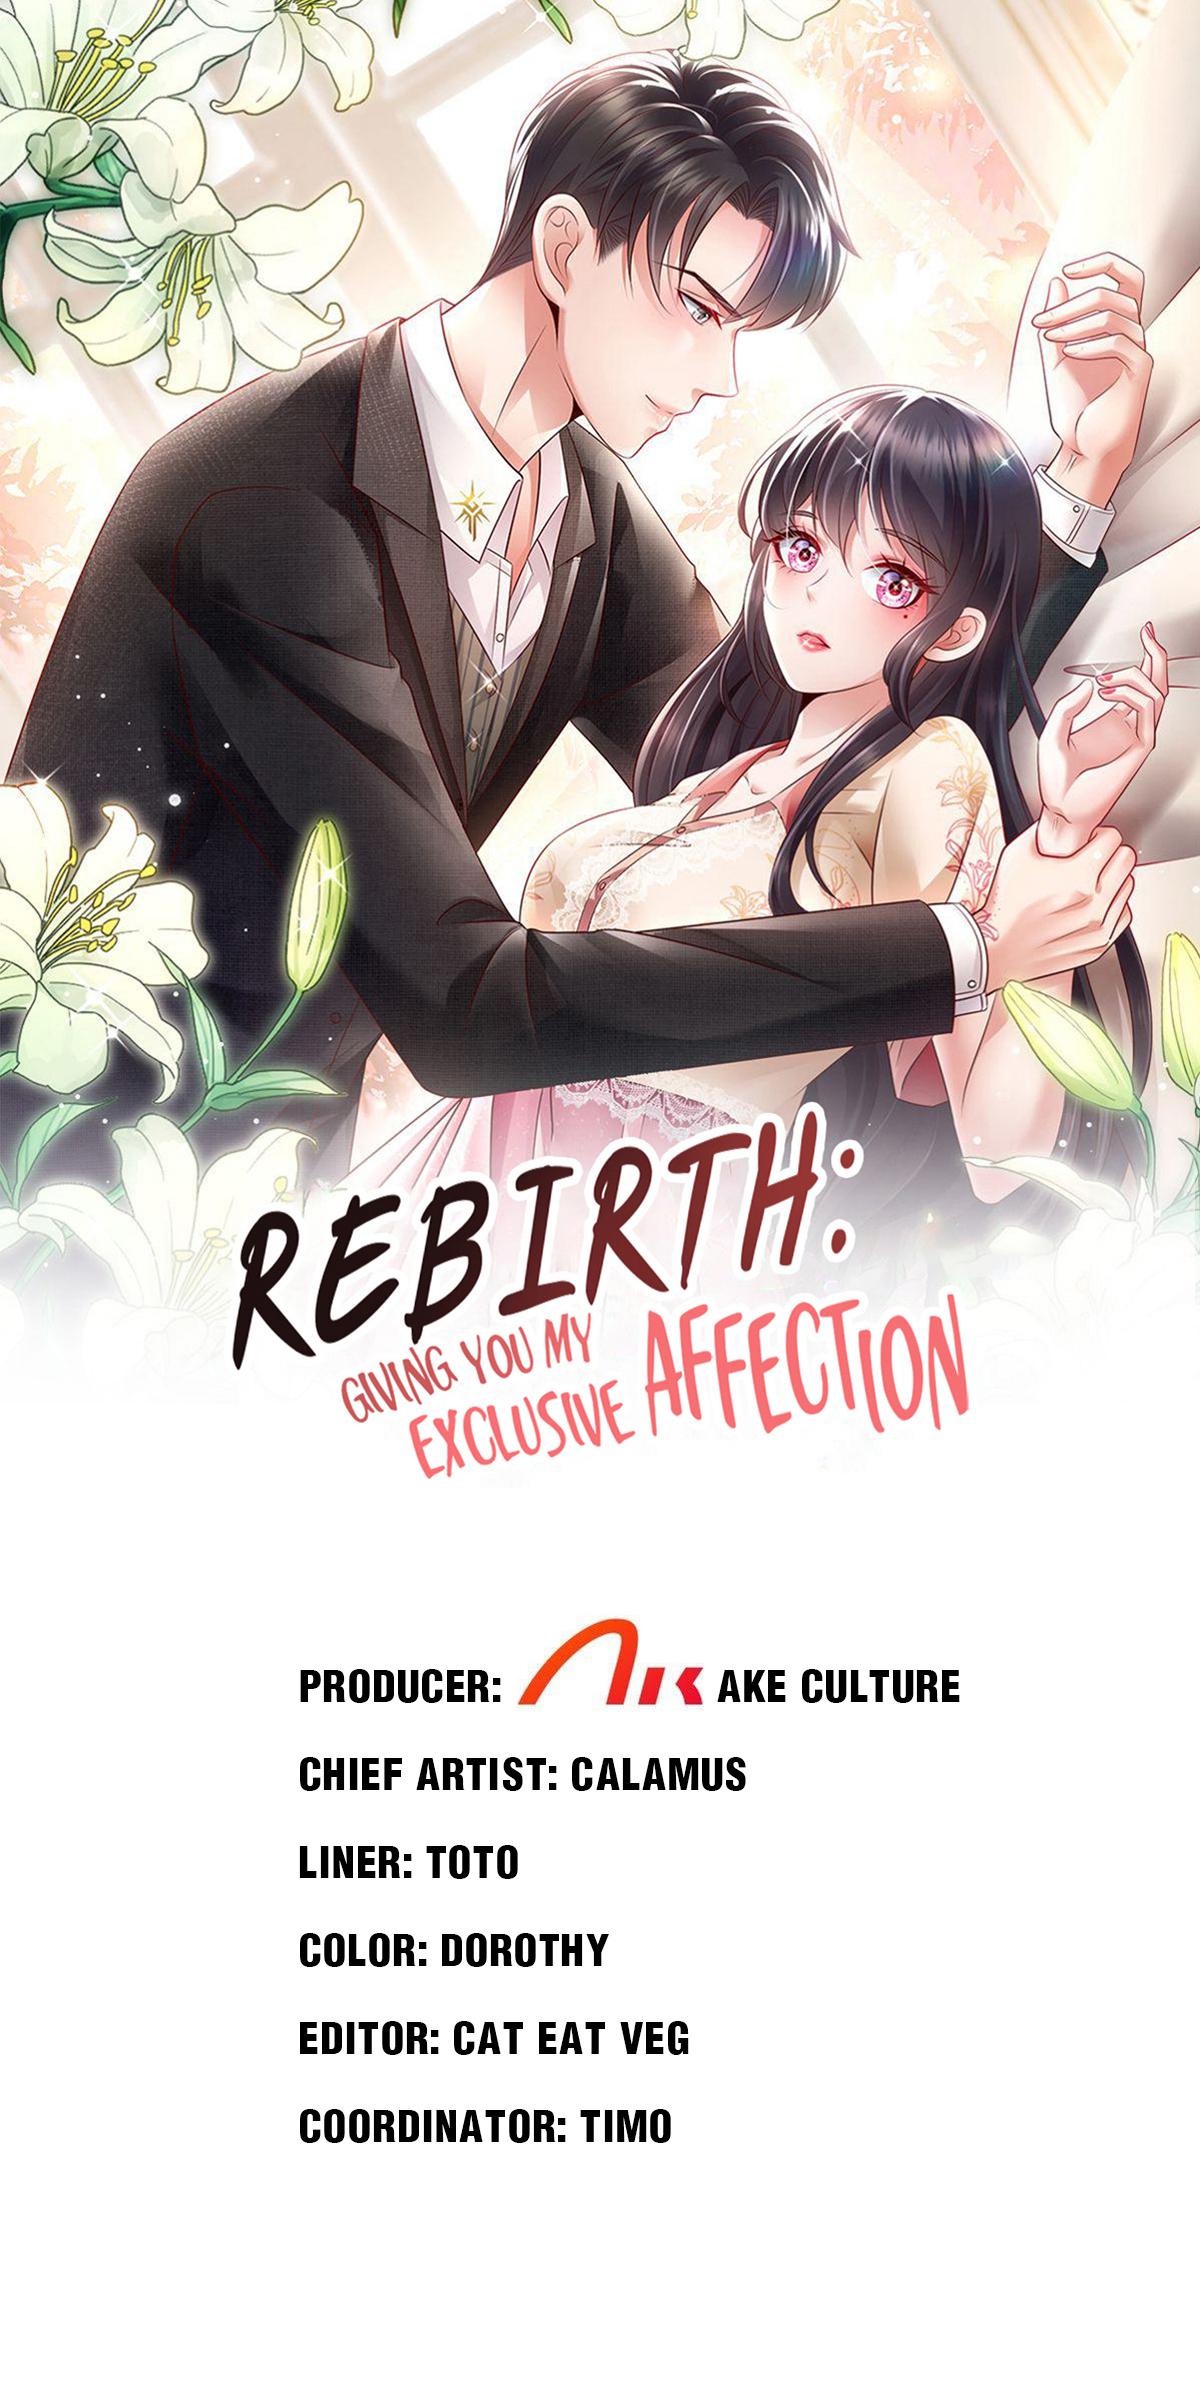 Rebirth: Giving You My Exclusive Affection 208